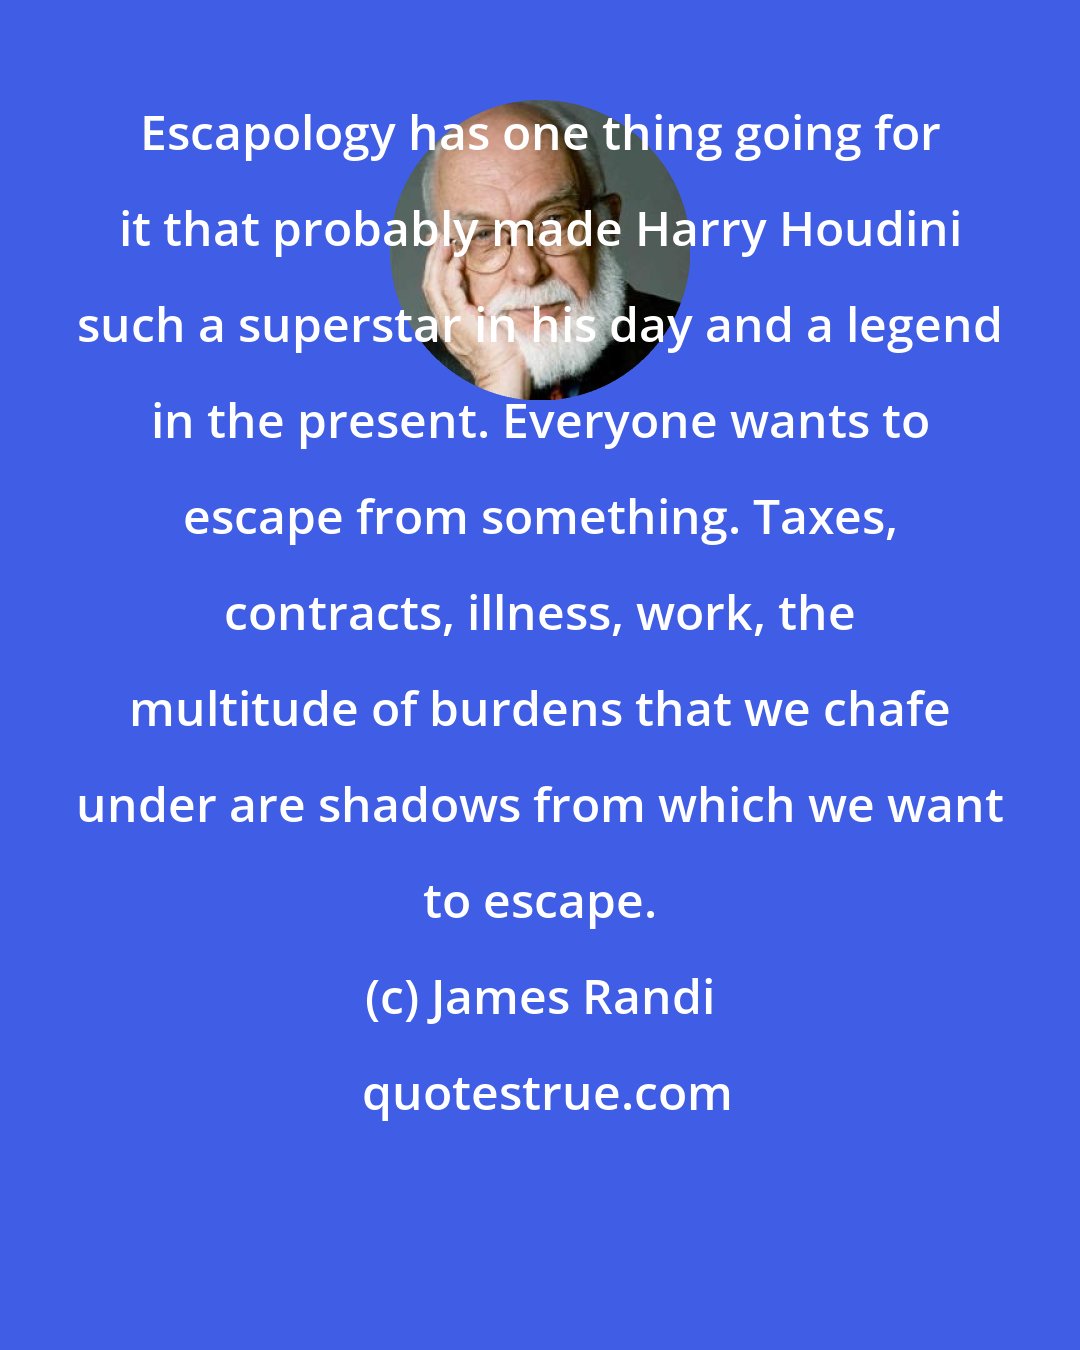 James Randi: Escapology has one thing going for it that probably made Harry Houdini such a superstar in his day and a legend in the present. Everyone wants to escape from something. Taxes, contracts, illness, work, the multitude of burdens that we chafe under are shadows from which we want to escape.